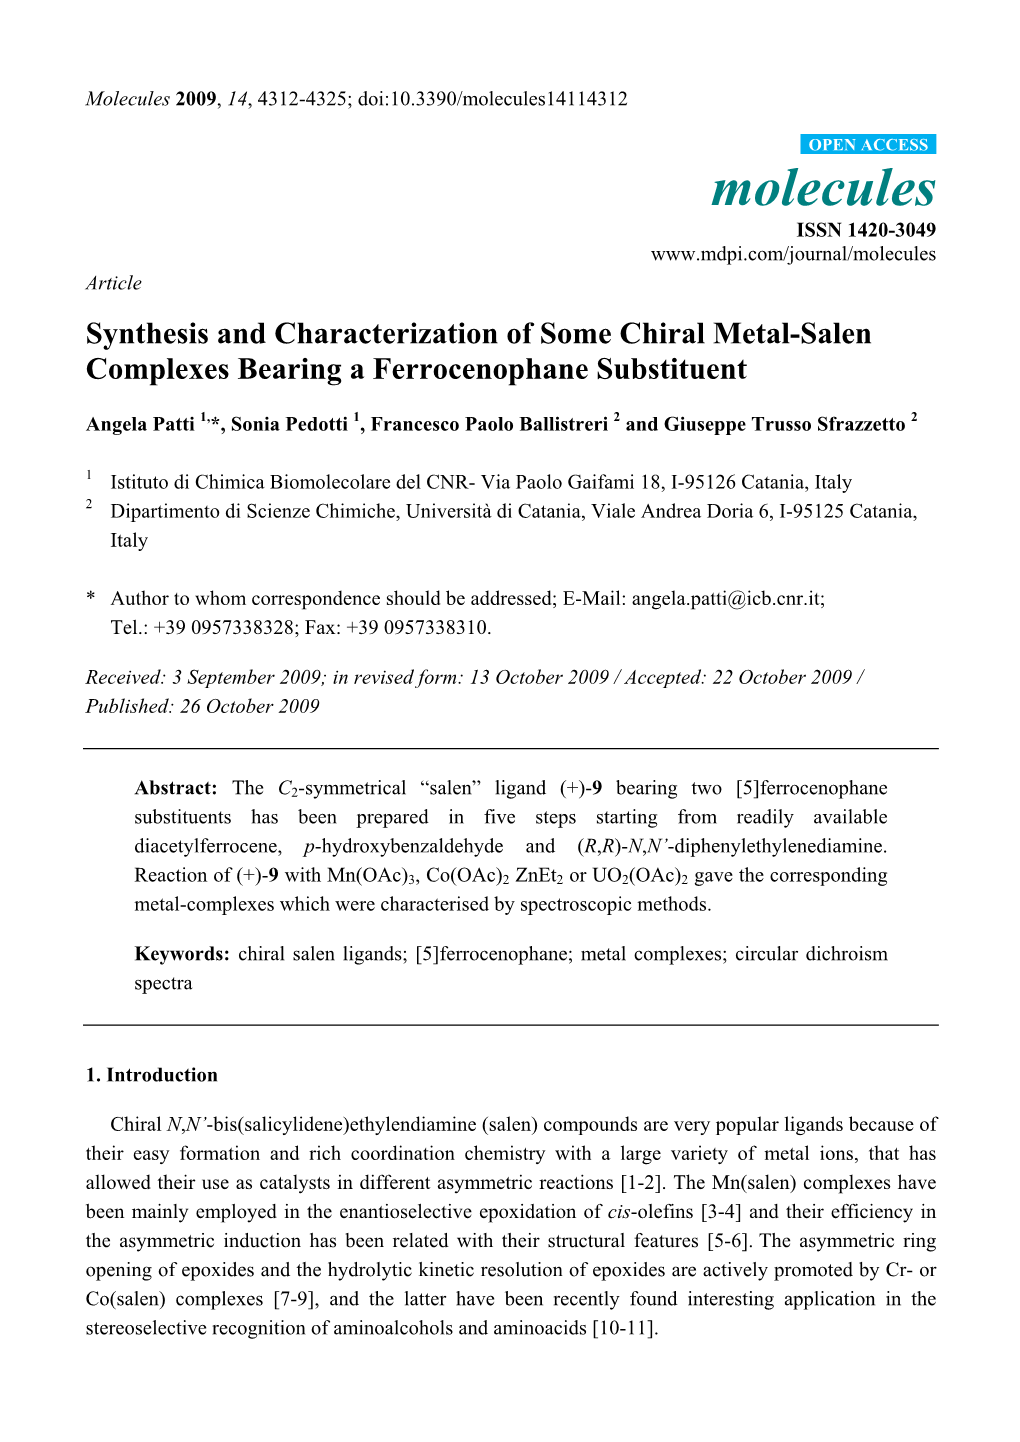 Synthesis and Characterization of Some Chiral Metal-Salen Complexes Bearing a Ferrocenophane Substituent